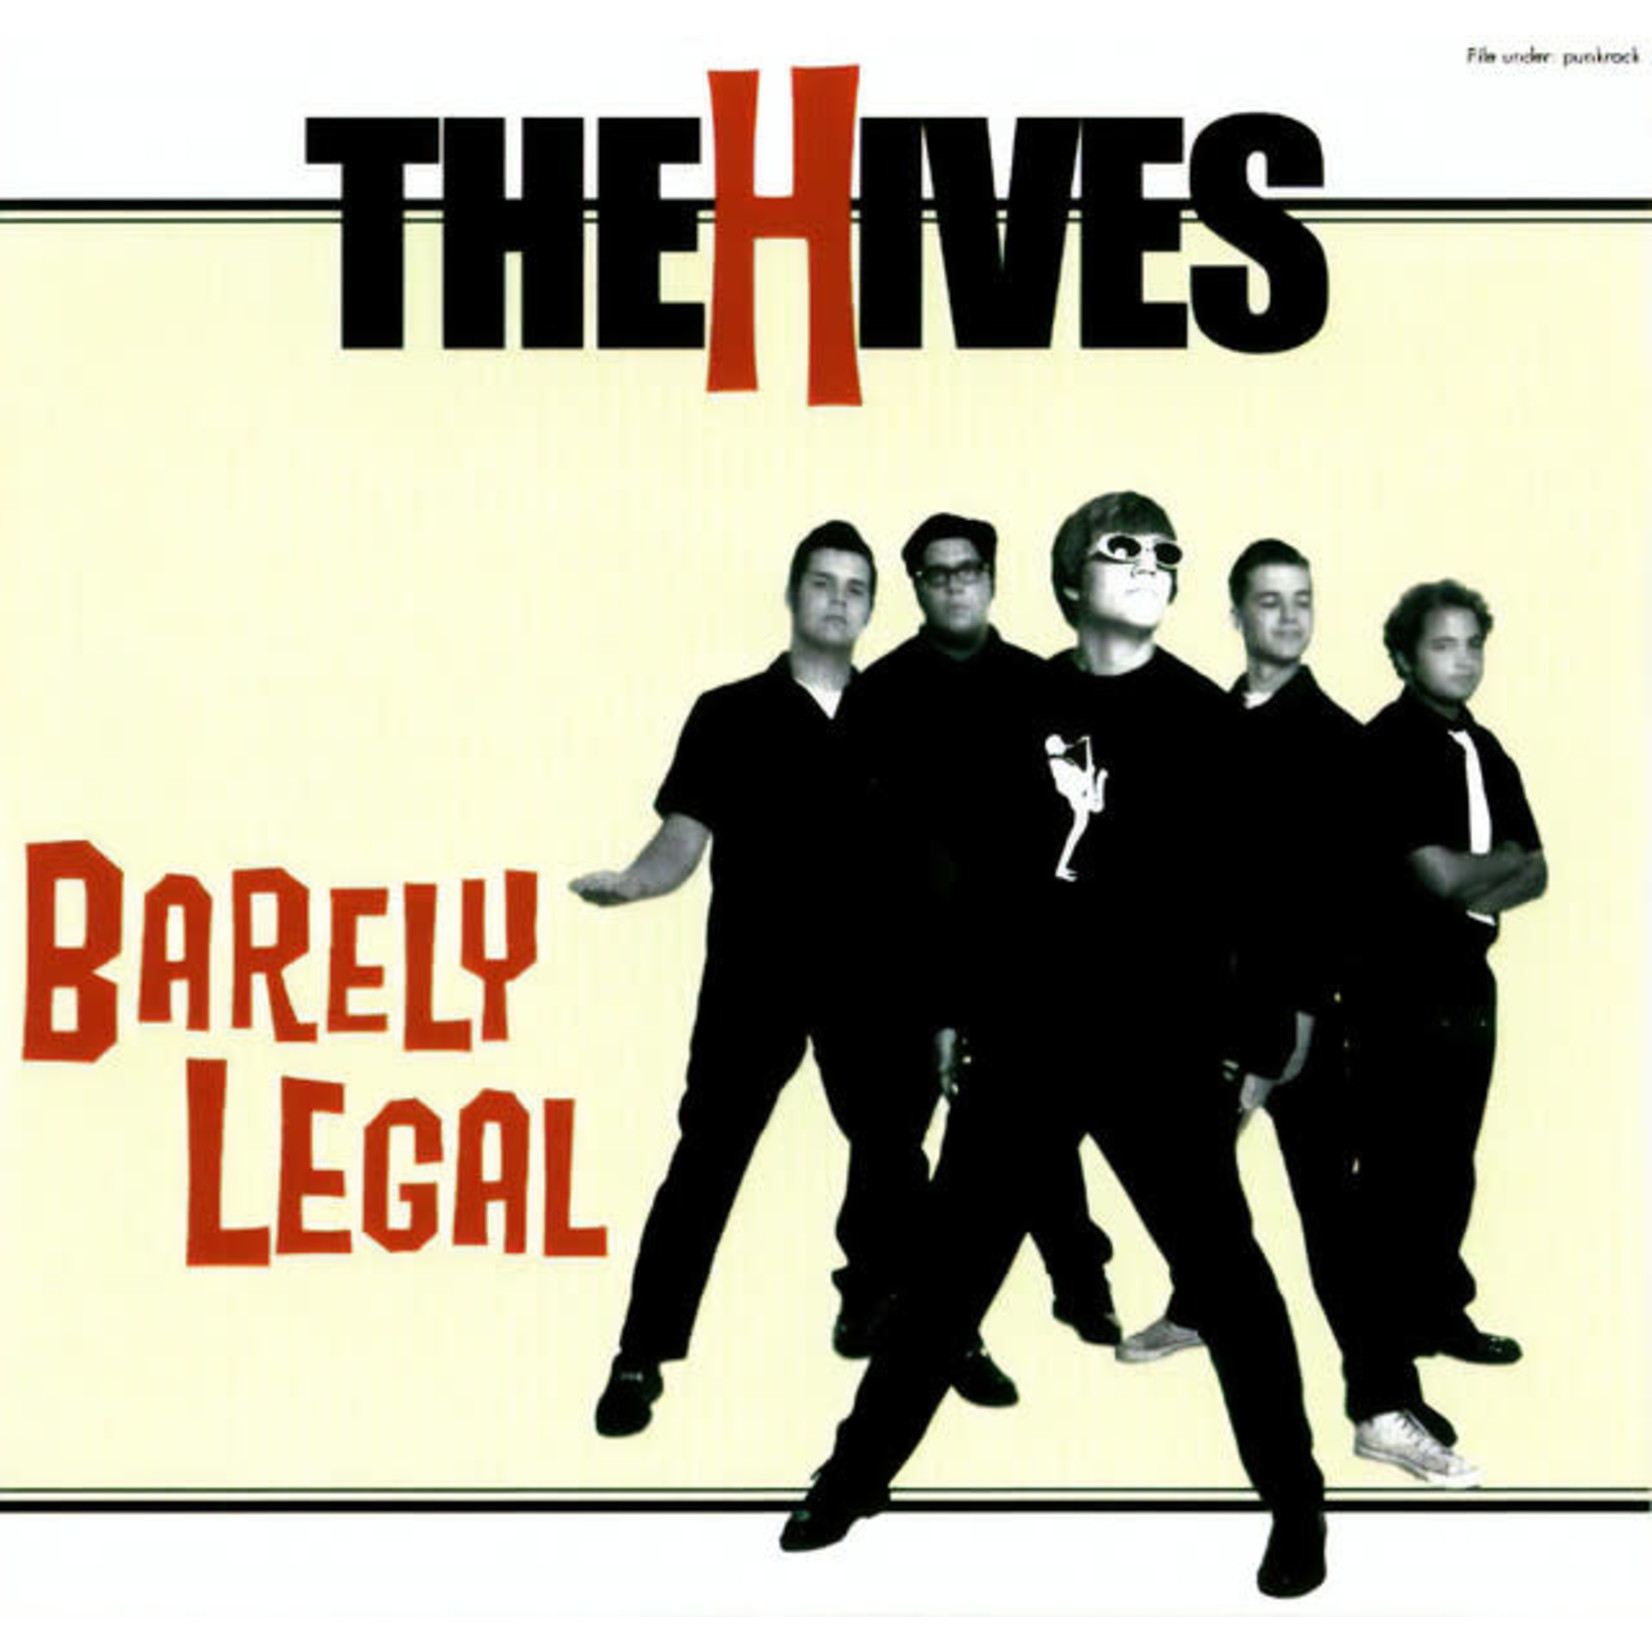 [New] Hives - Barely Legal (anniversary, coloured vinyl)